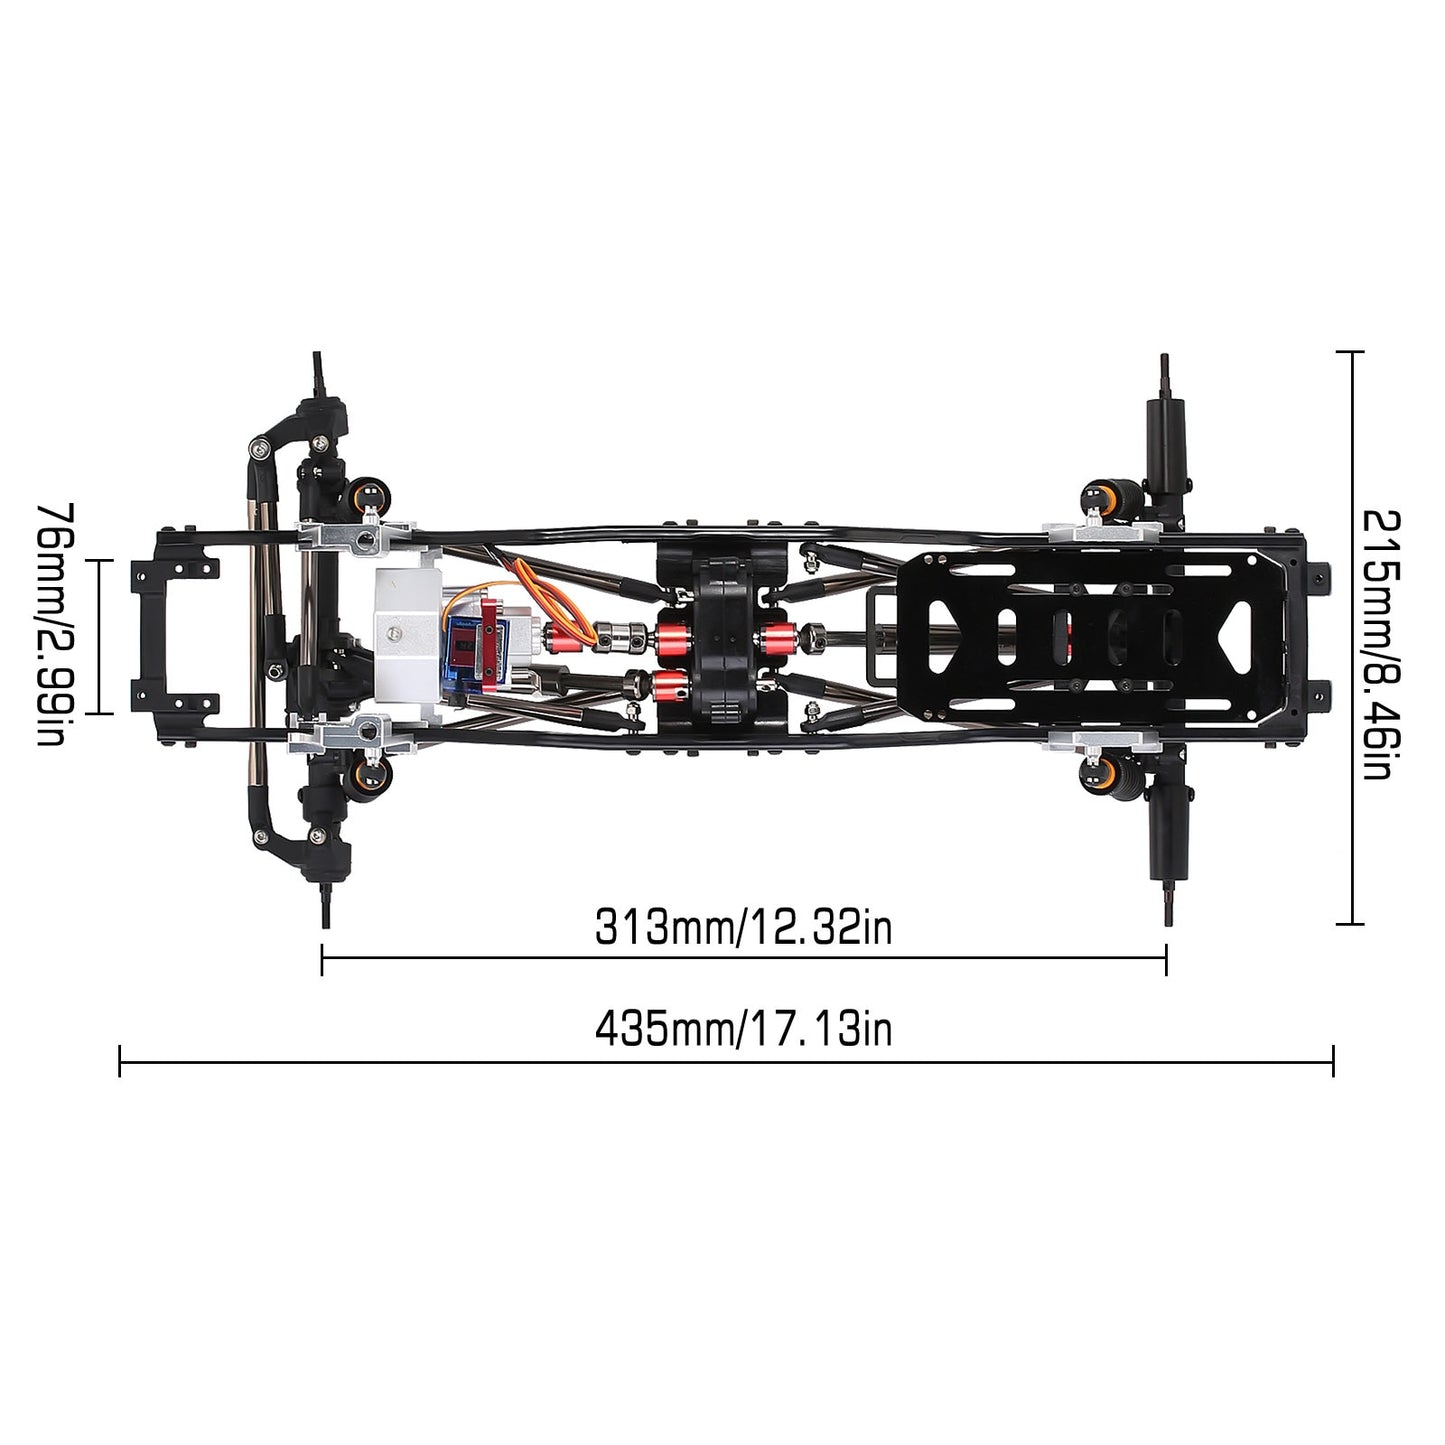 INJORA 313mm Wheelbase Metal Chassis Frame with Prefixal Single / 2-Speed Transmission for 1/10 RC Crawler Car Axial SCX10 90046